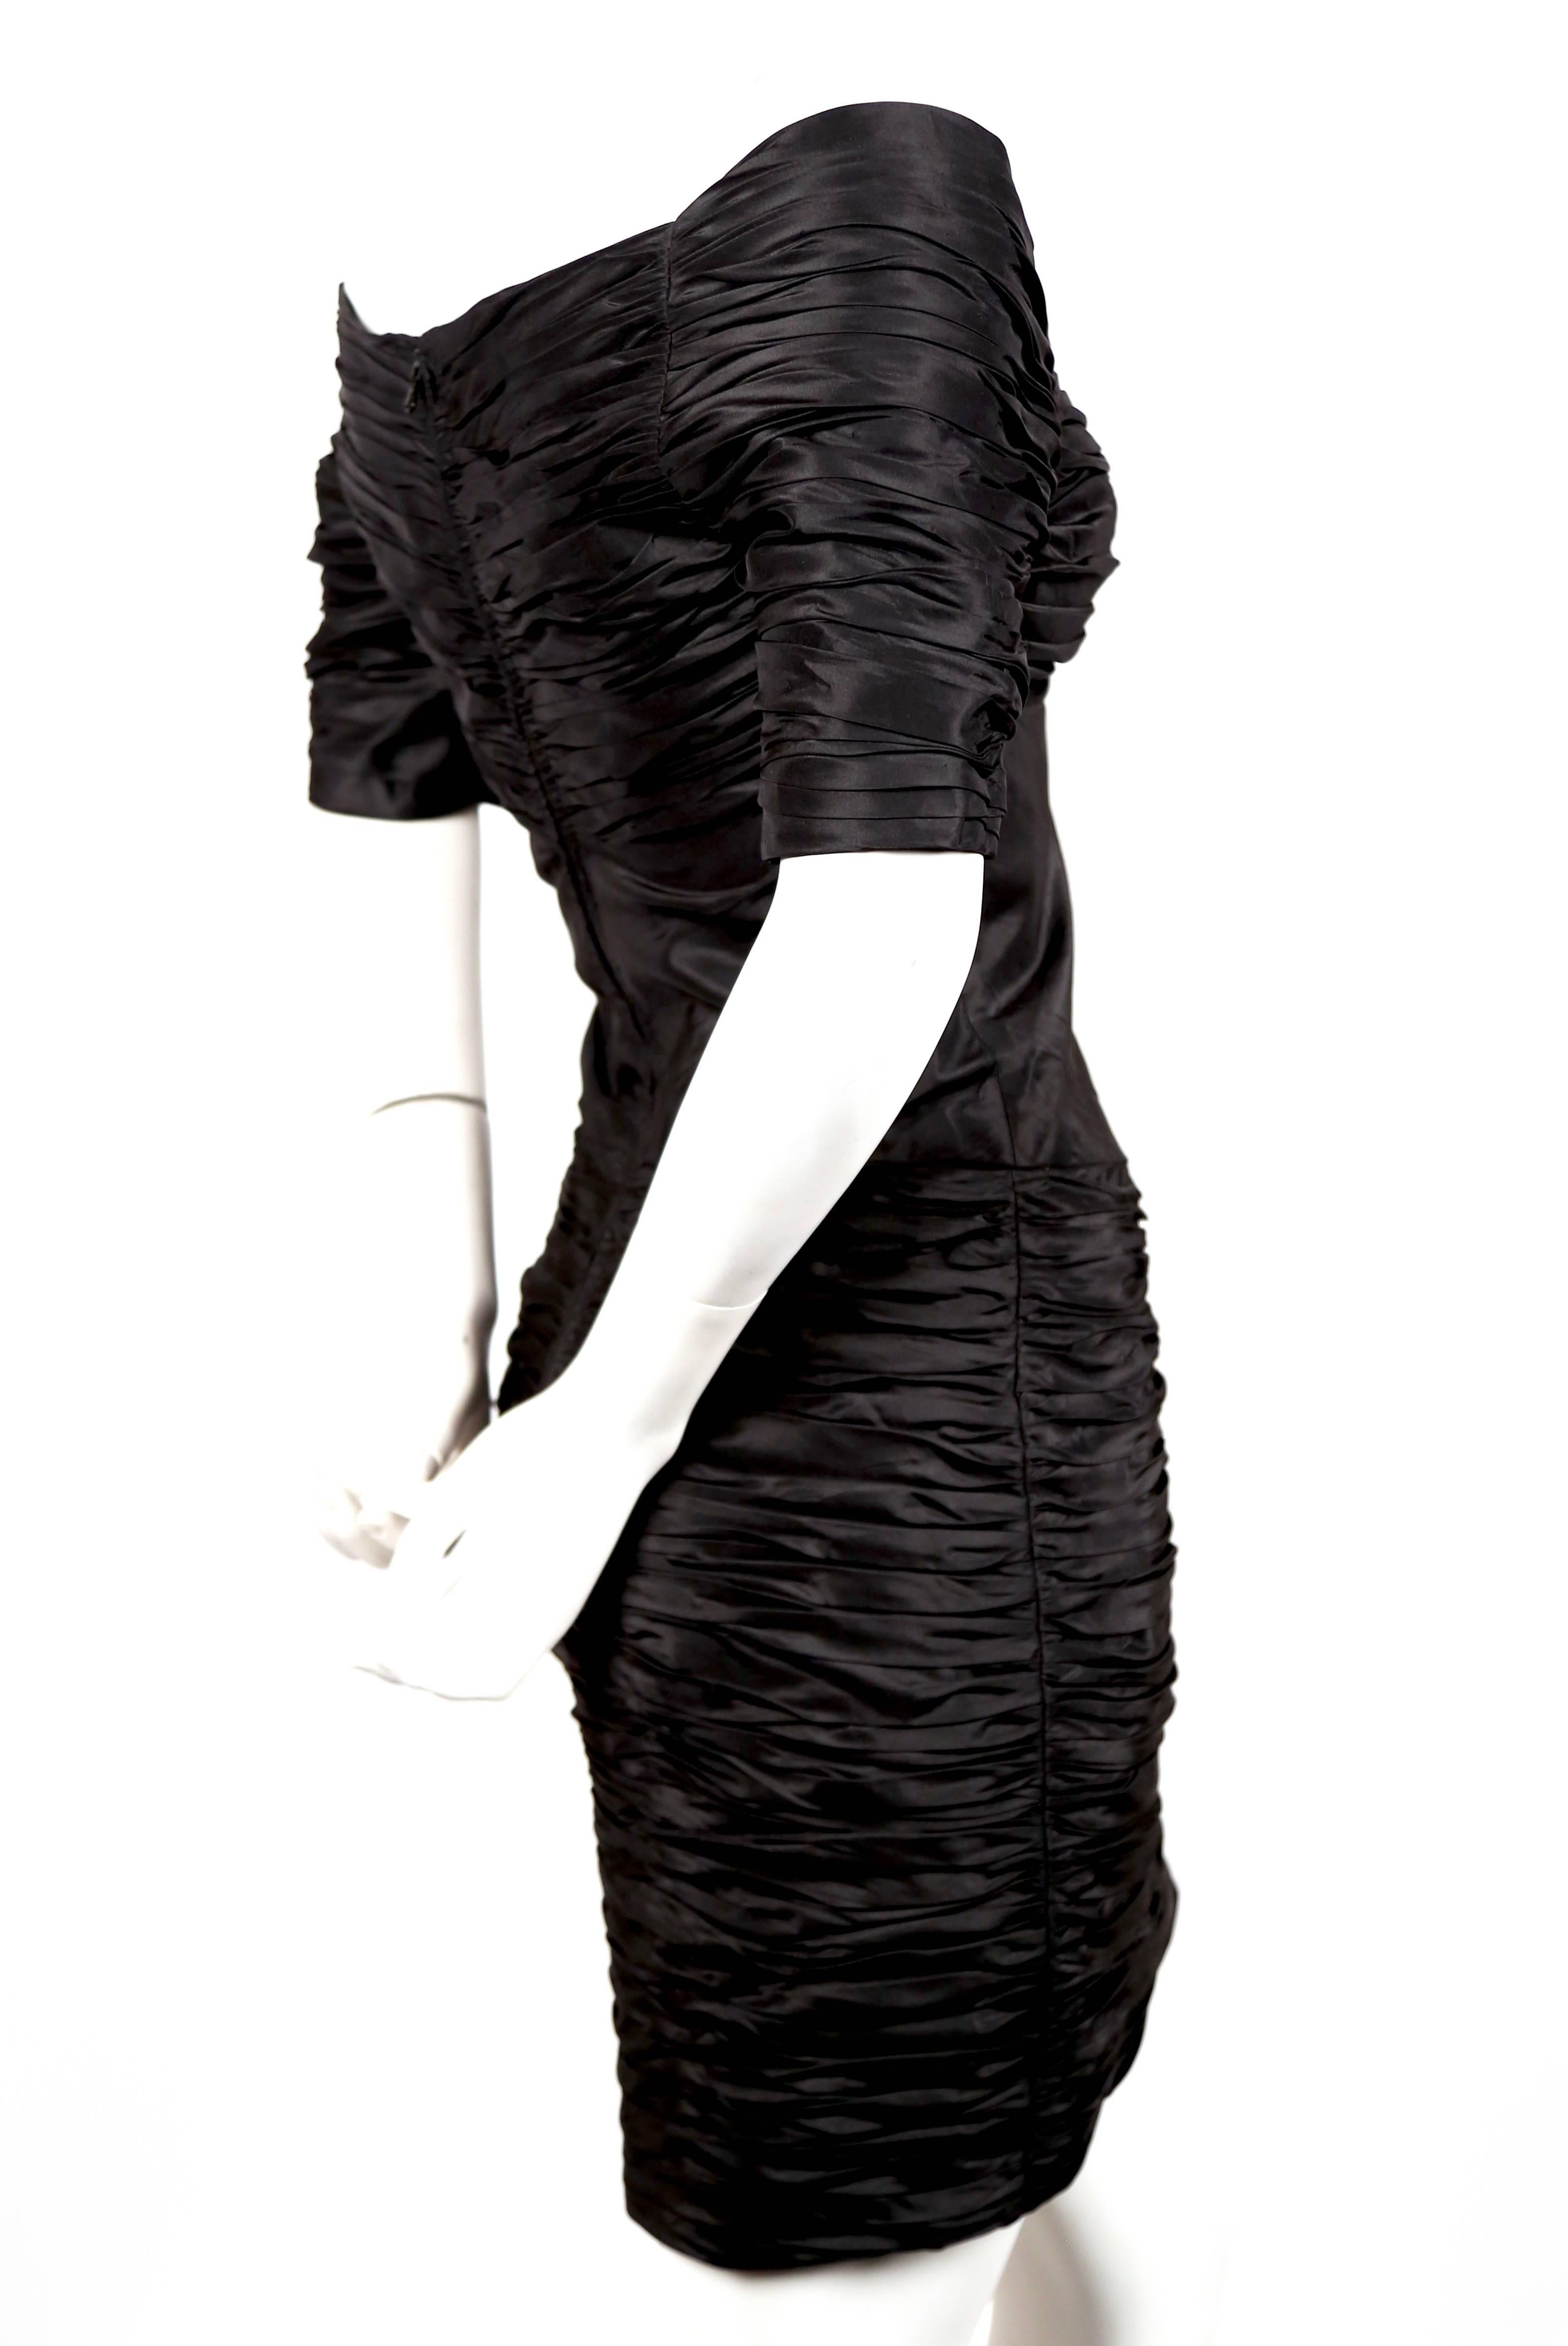 Jet-black, ruched dress designed by Loris Azzaro dating to the early 1980's. Dress best fits a US size 2 (32